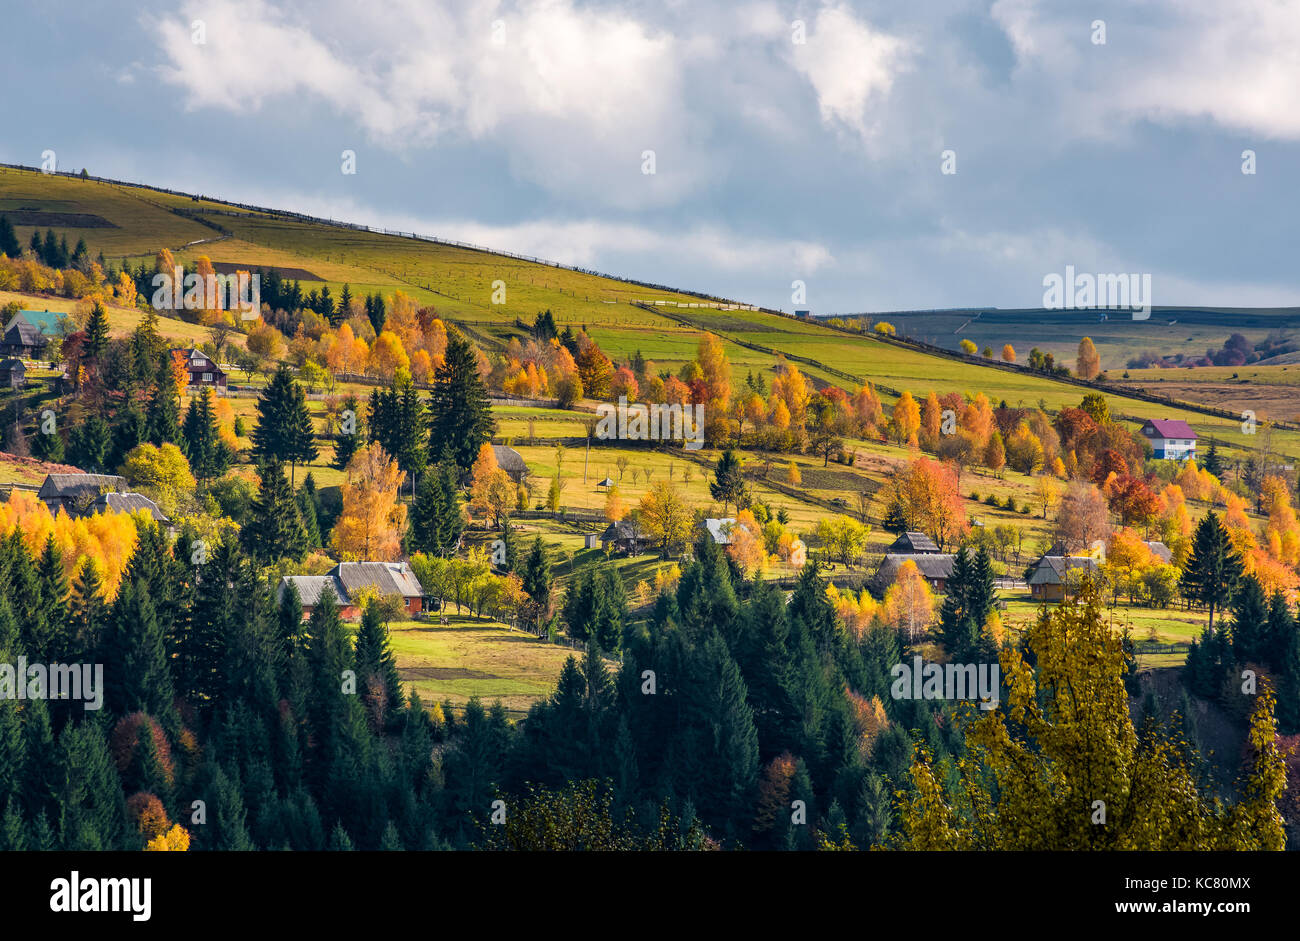 village on hillsides in mountains. beautiful countryside scenery with yellow trees Stock Photo